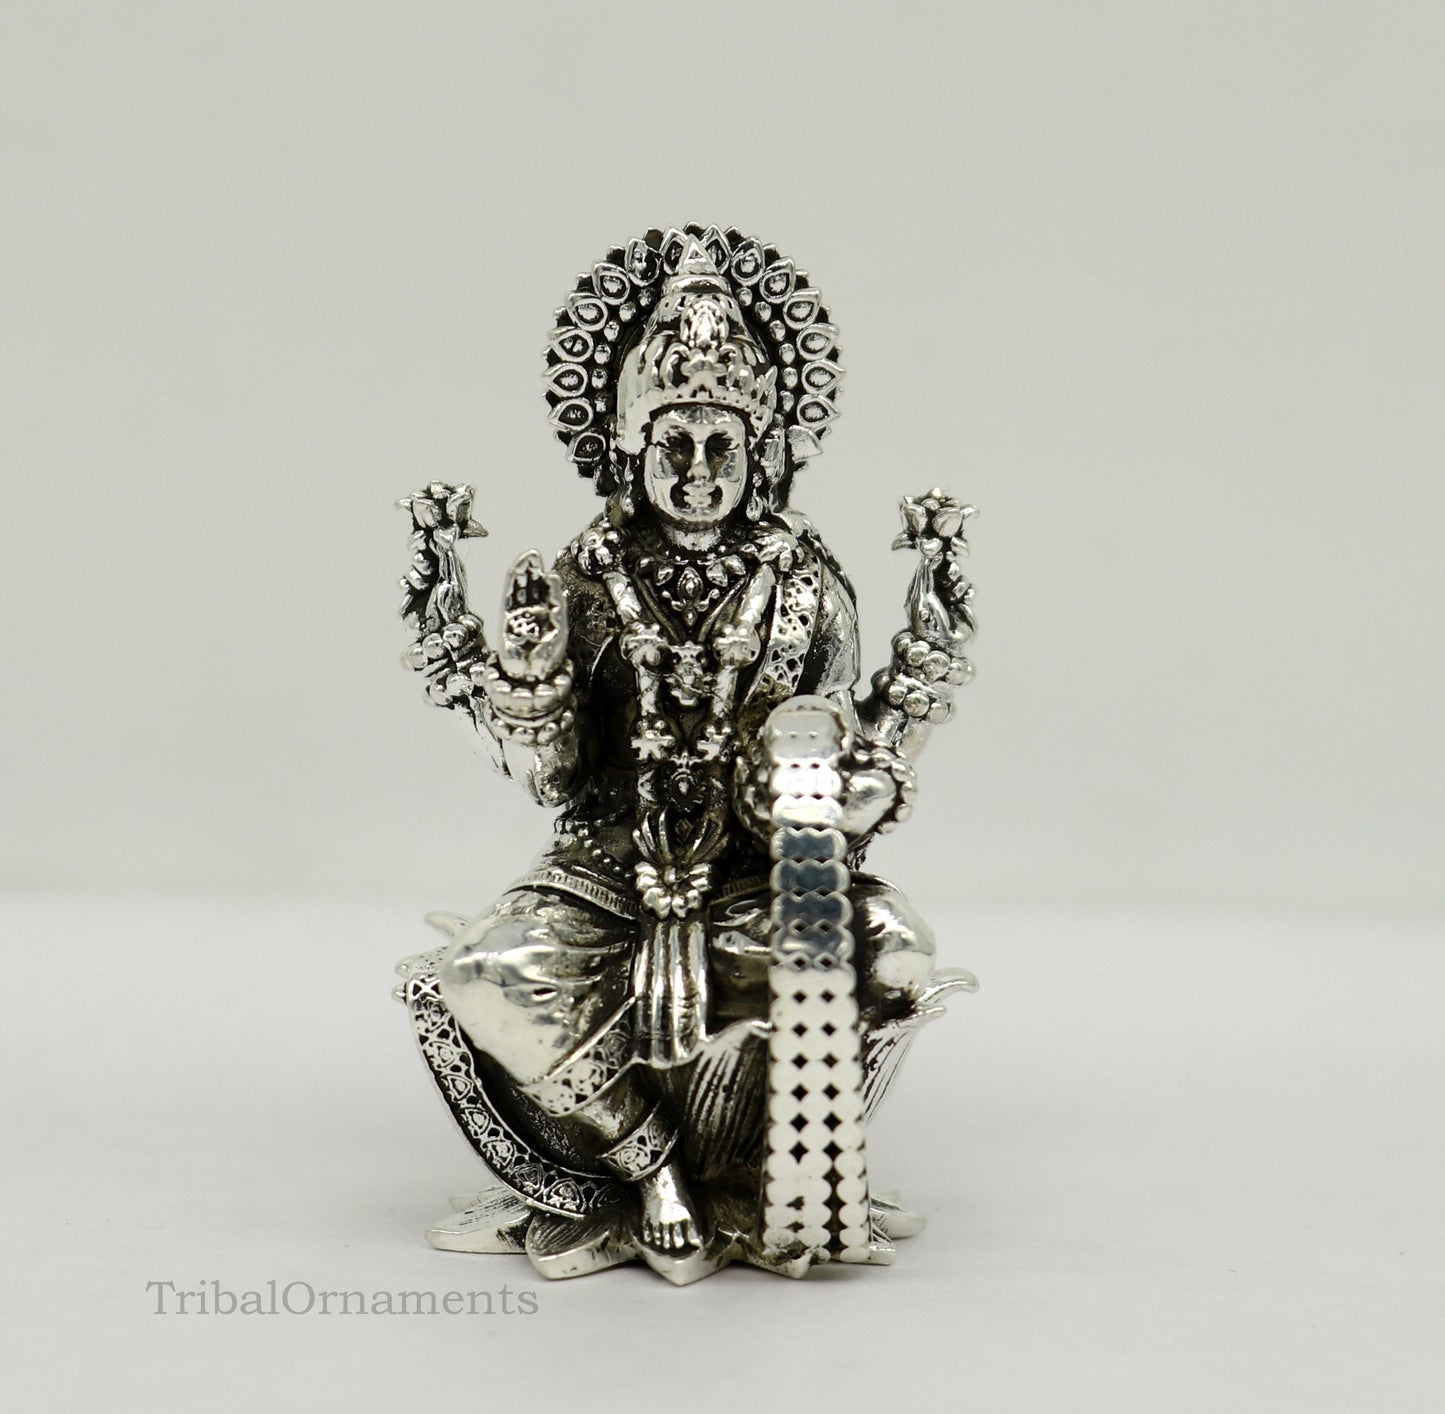 Pure 925 Sterling silver handmade customized Hindu Goddess Laxmi statue, puja article figurine, home décor puja articles gifting art26 - TRIBAL ORNAMENTS